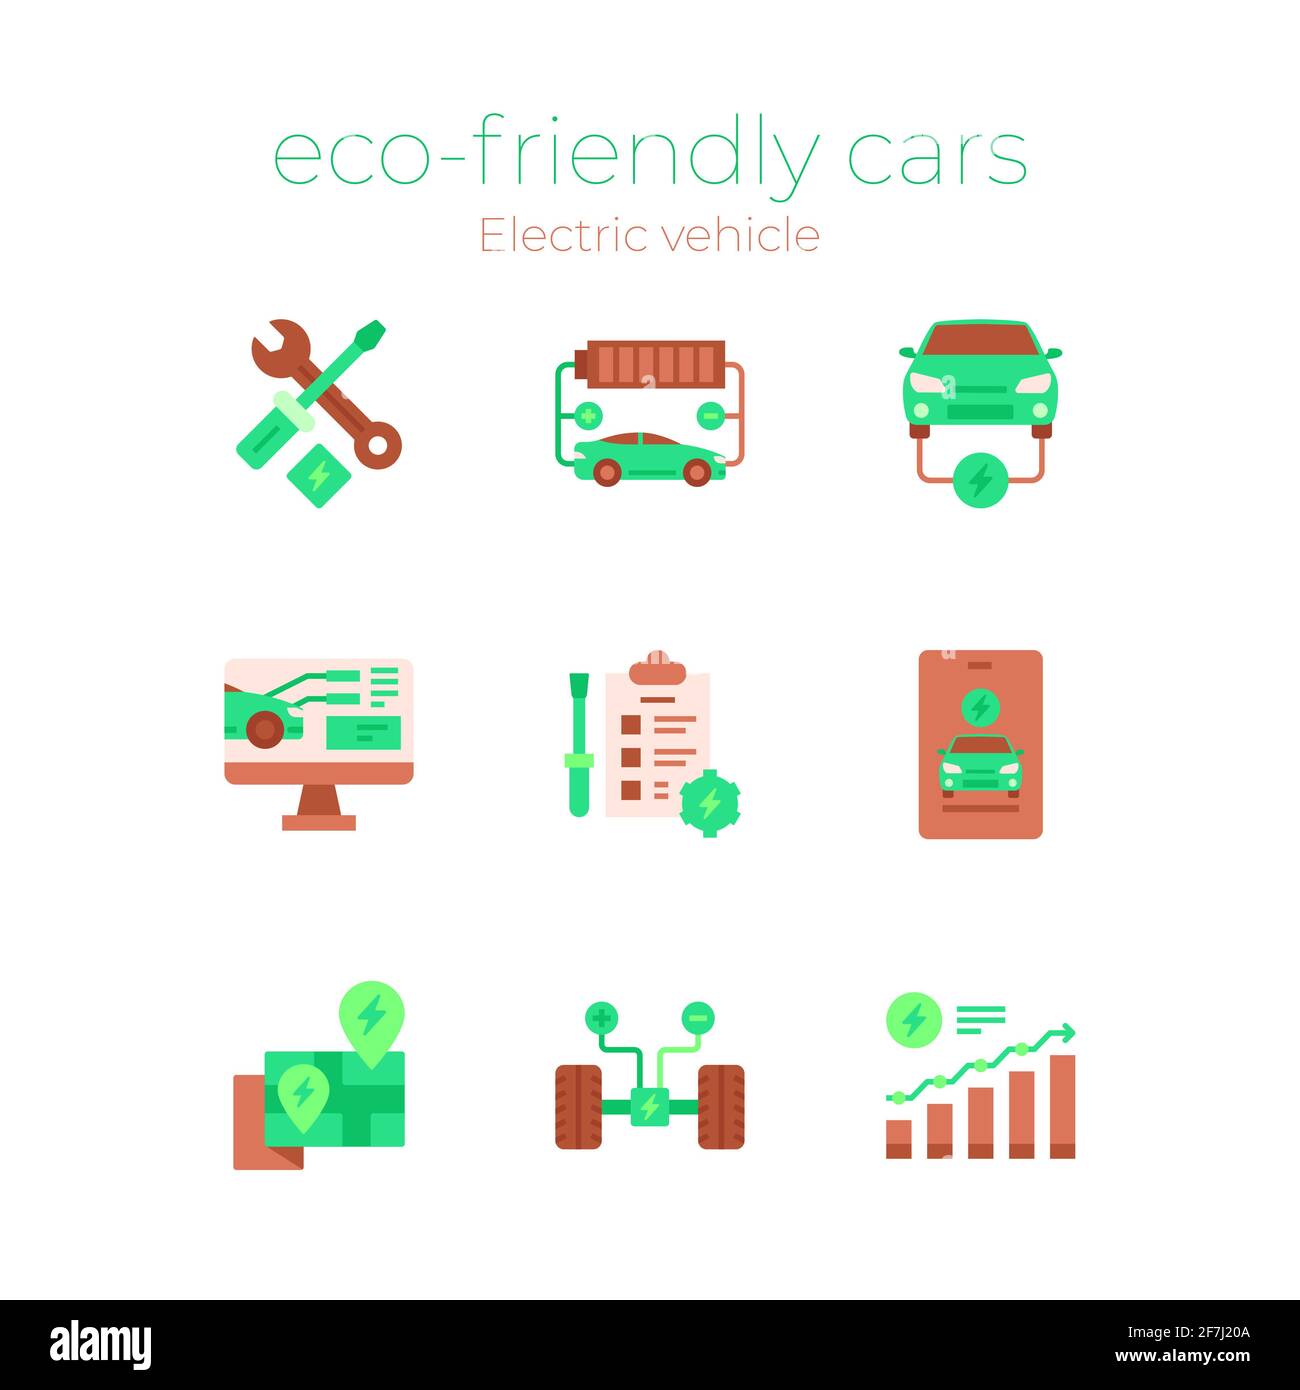 Eco-friendly cars icon, Electric vehicle Stock Photo